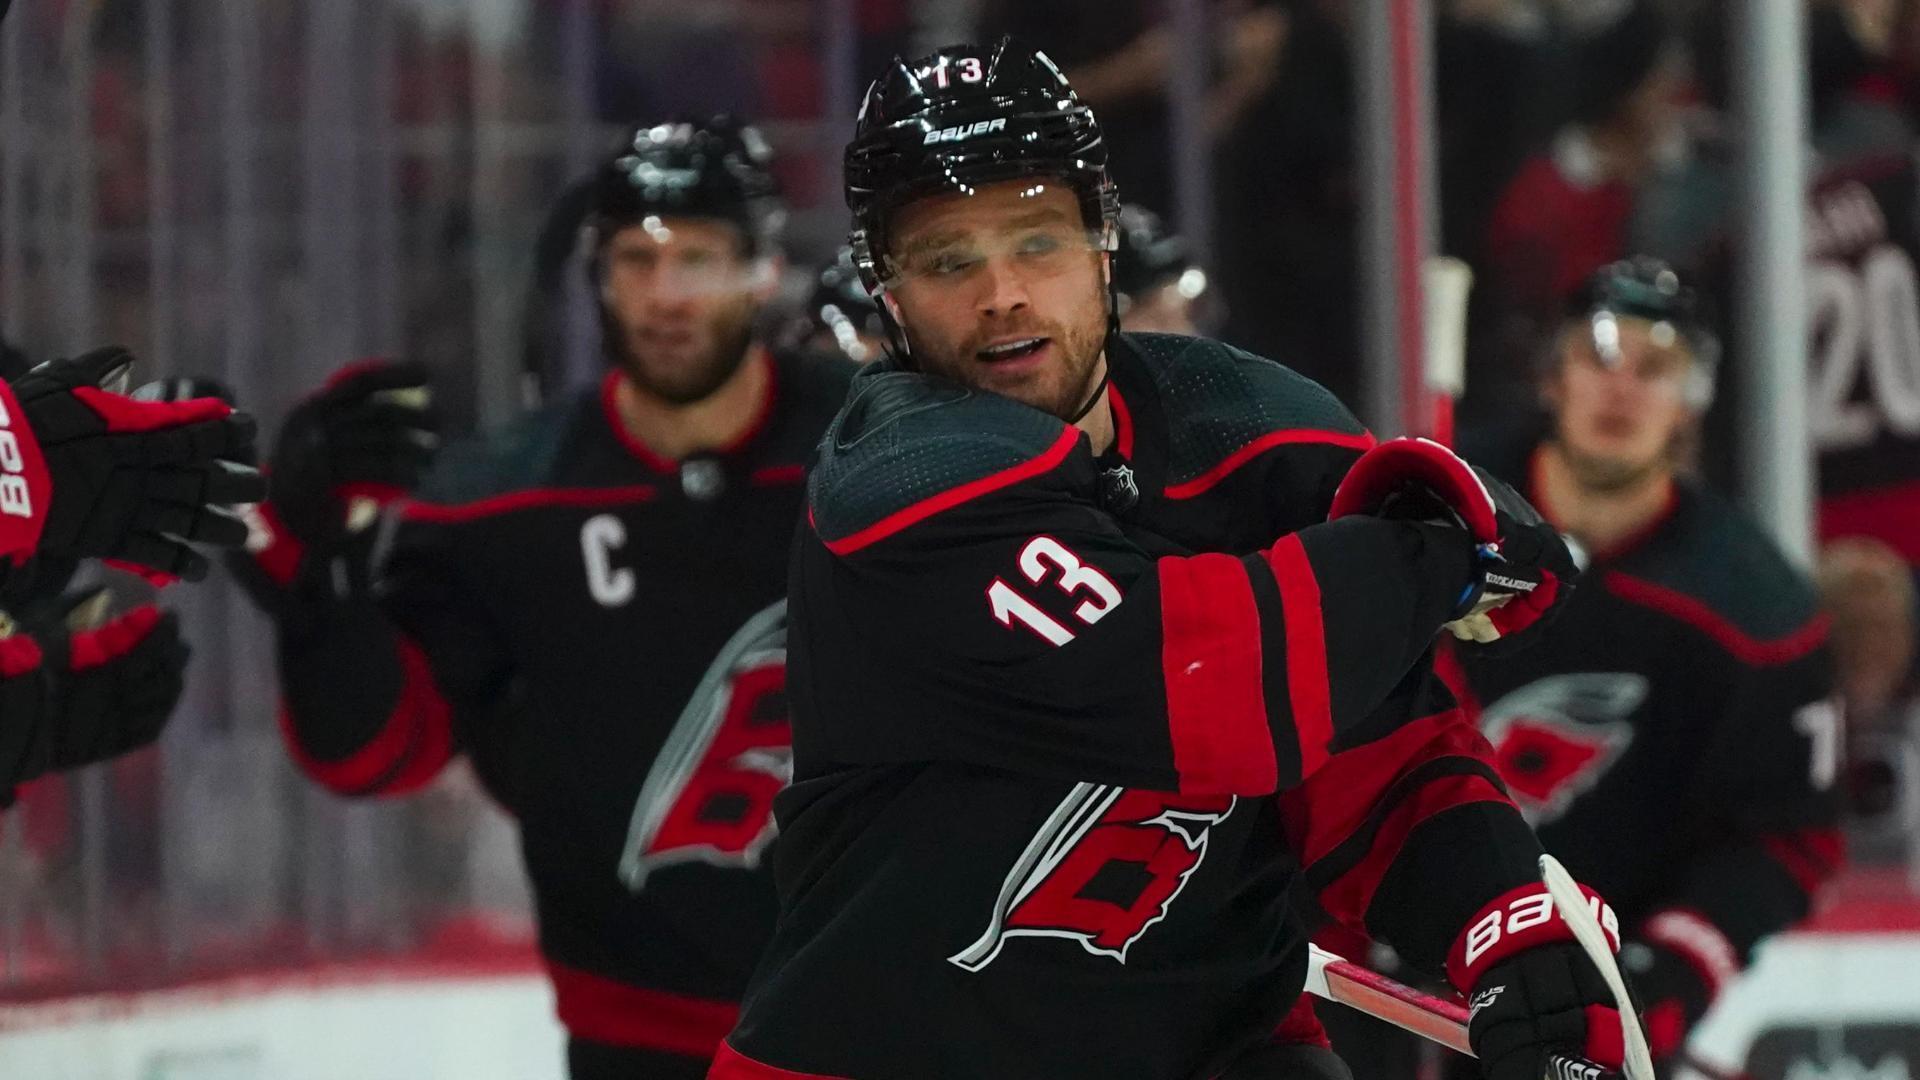 Max Domi's second goal increases Hurricanes' lead